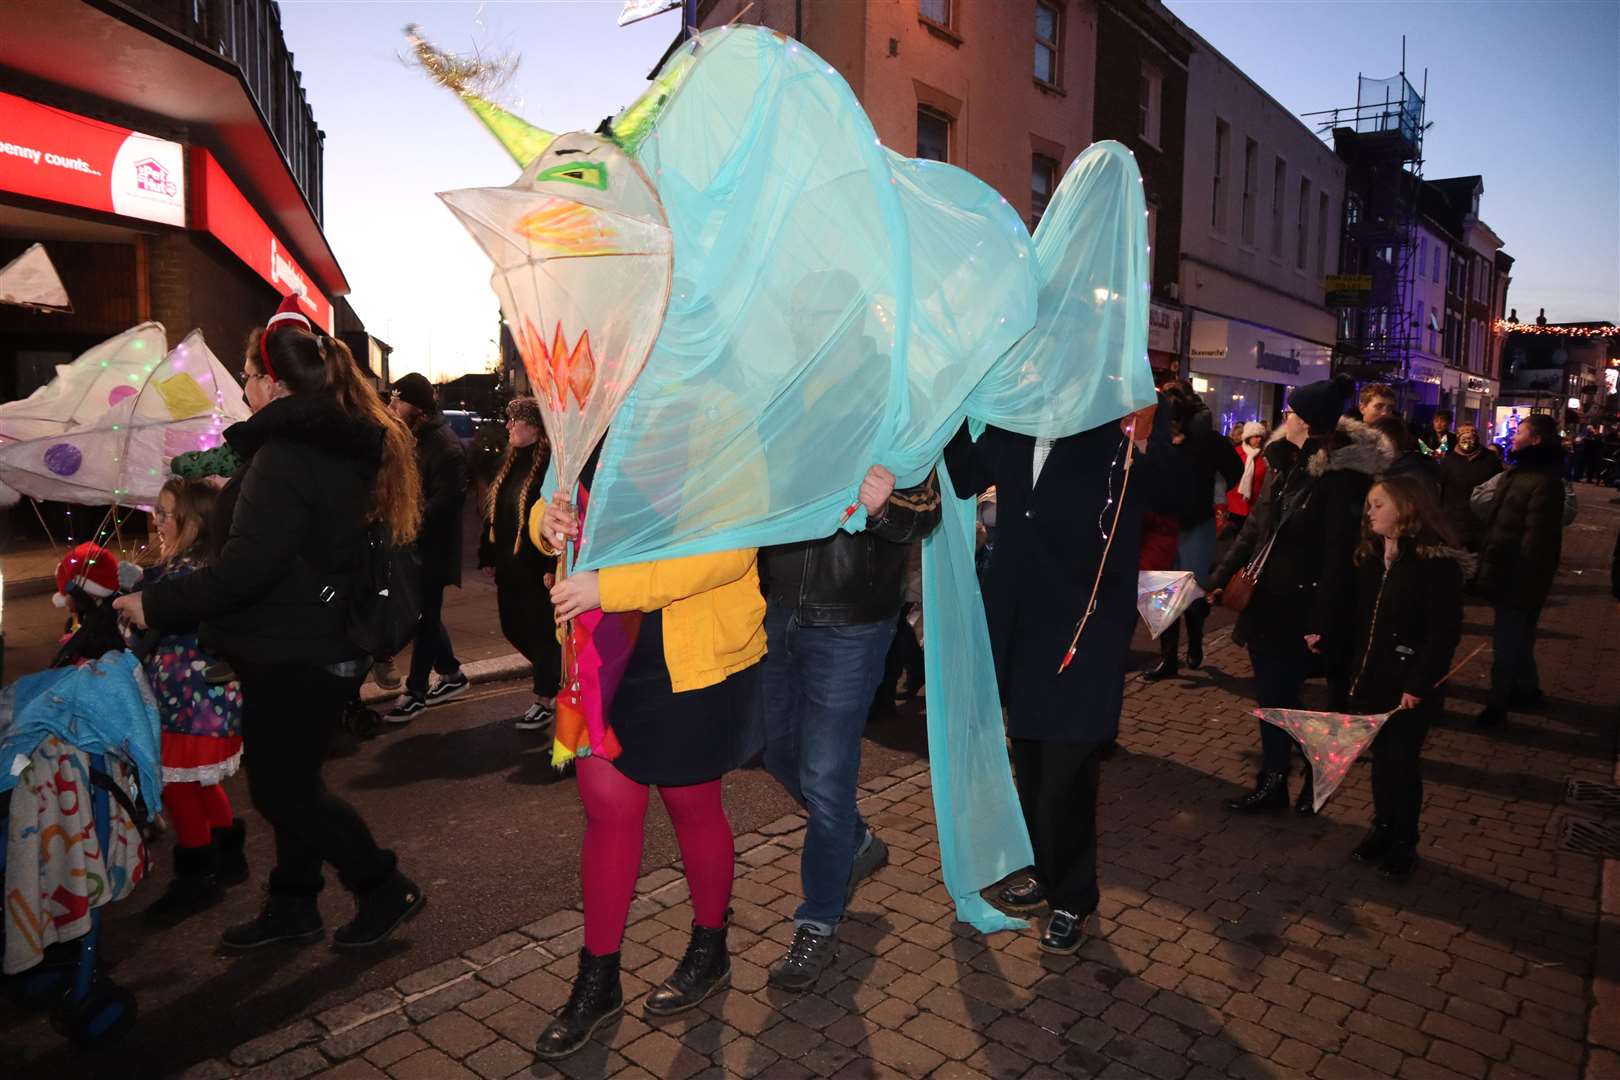 More than 200 lights including this 'jelly fish' were made for the Sheerness lantern parade on Saturday